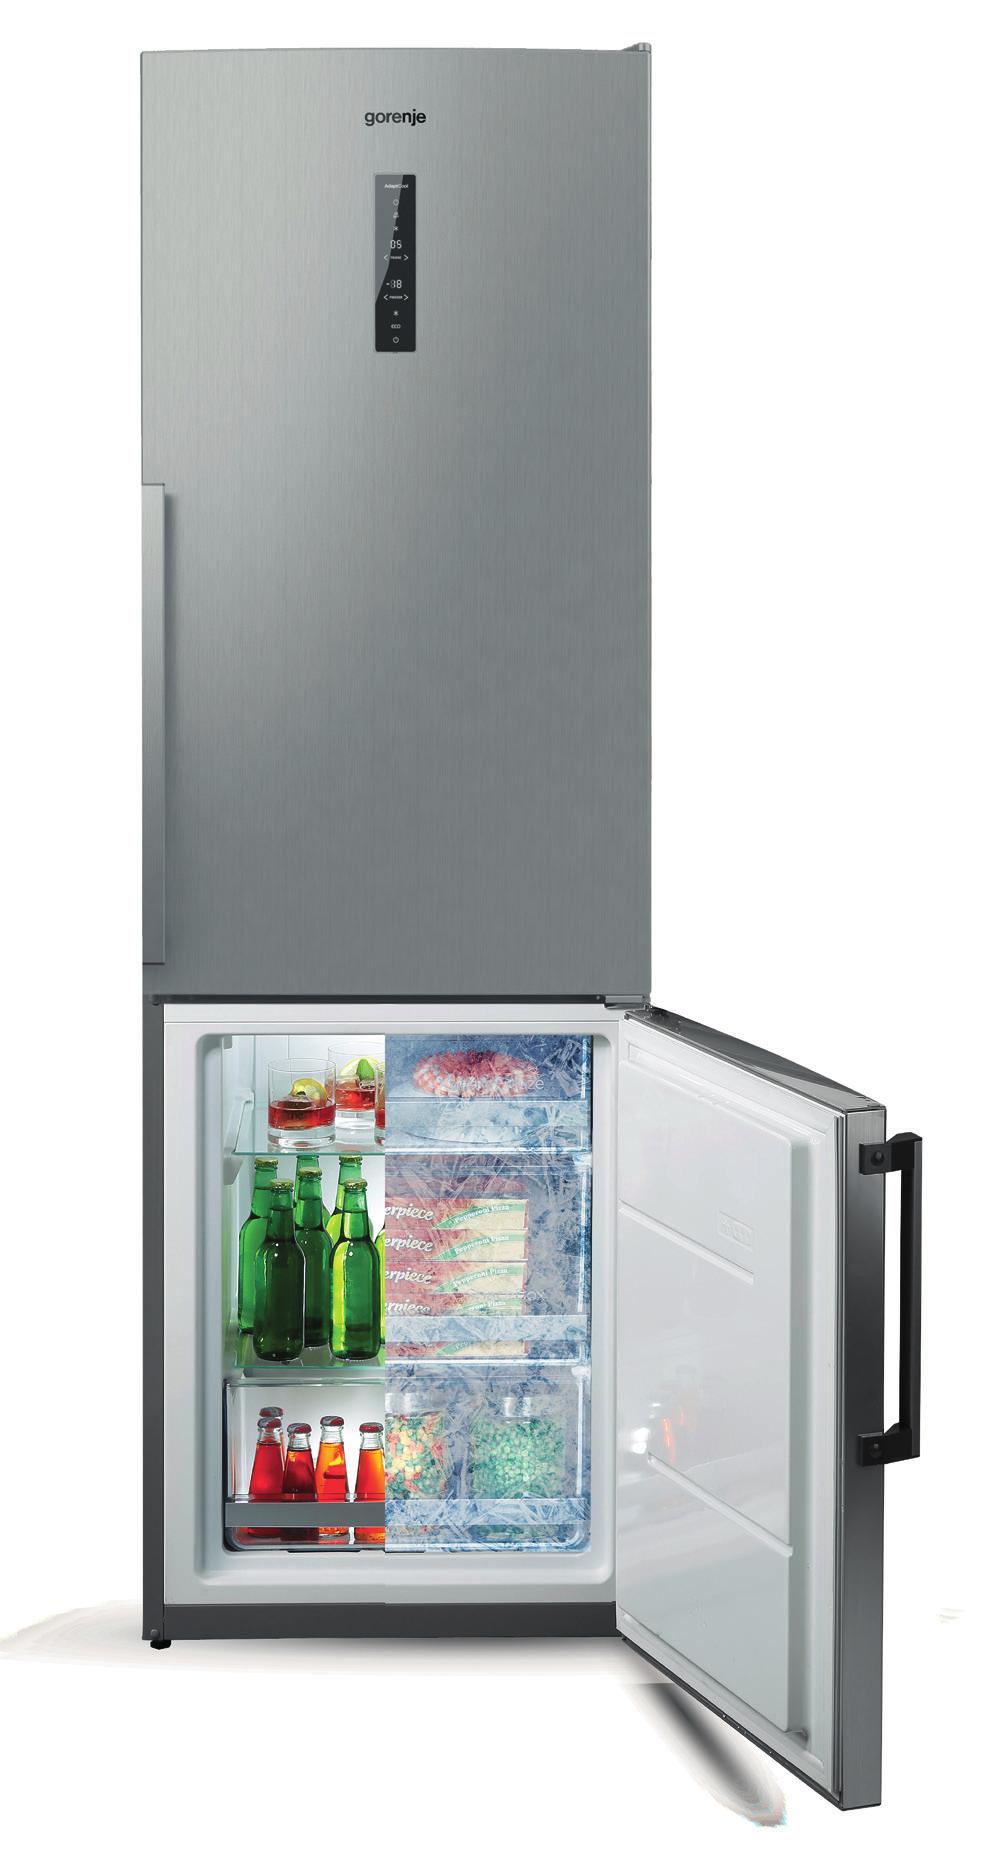 8 REFRIGERATORS The big party can start